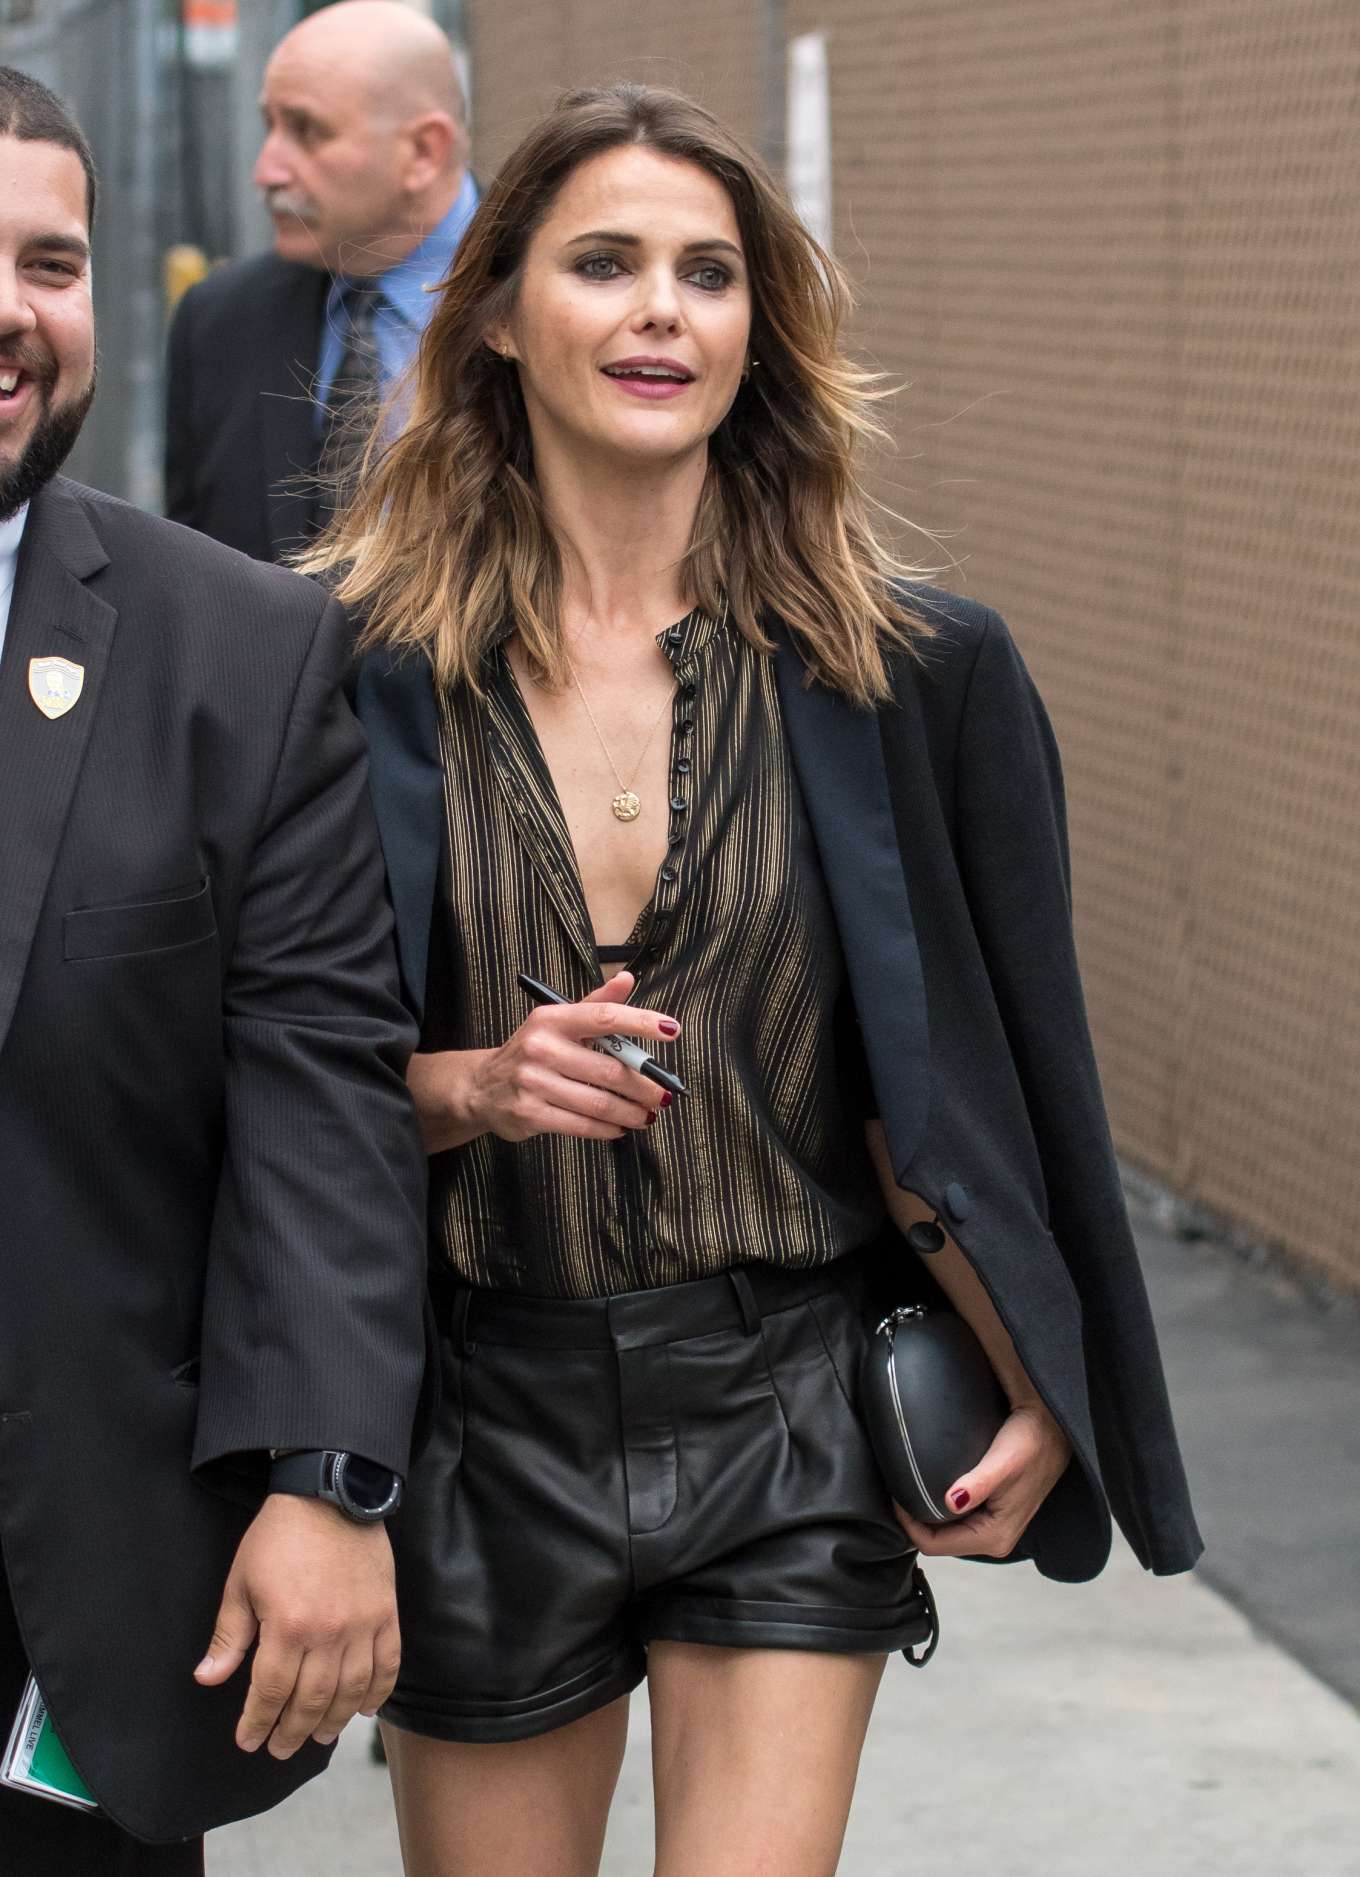 Keri Russell - Looks stunning while arrives to Jimmy Kimmel Live in LA ...